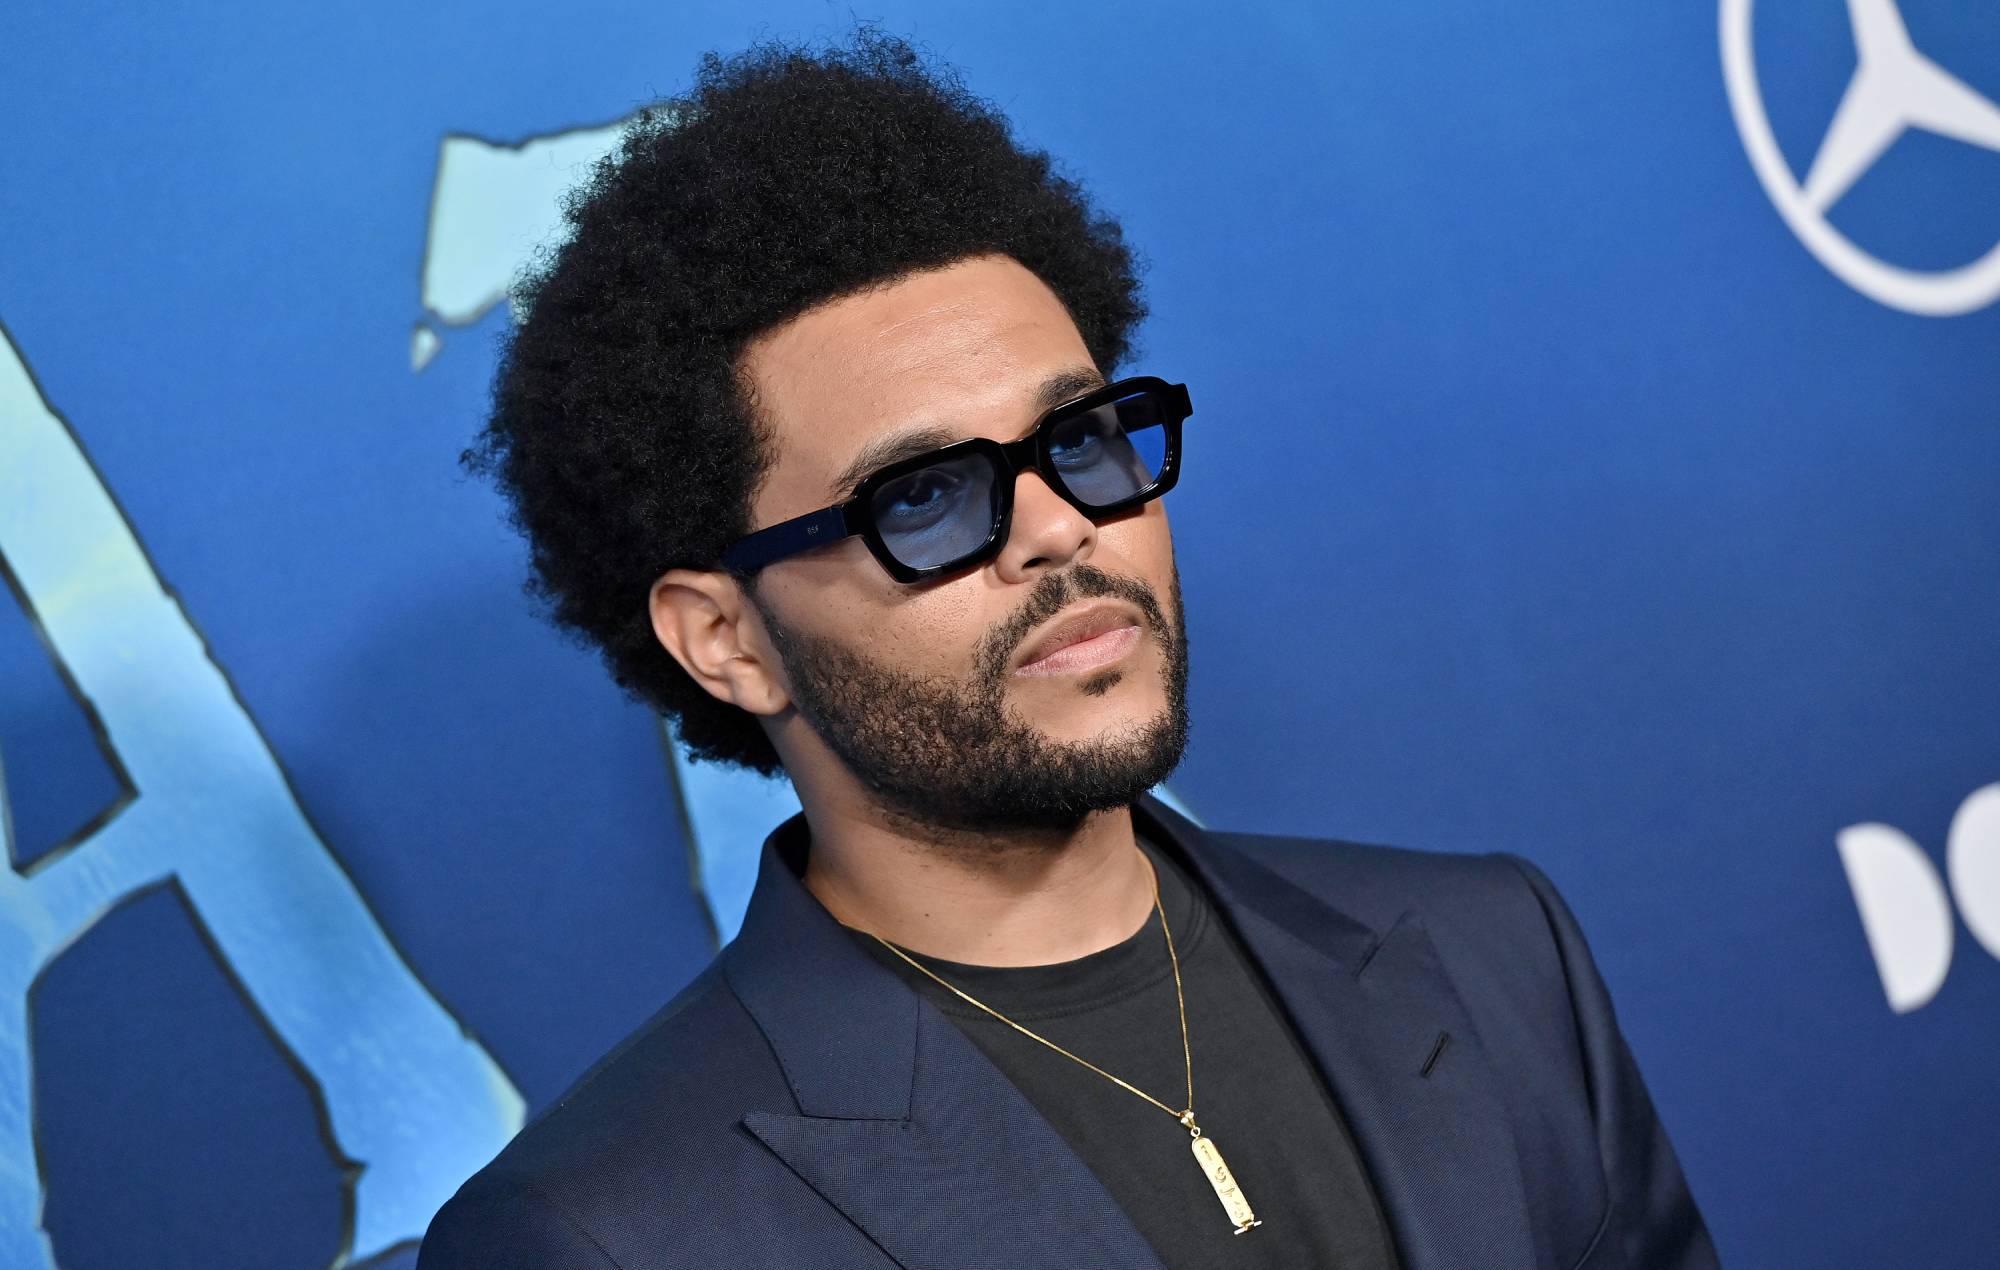 The Weeknd pledges $2million to Provide 18million loaves of bread to families in Gaza